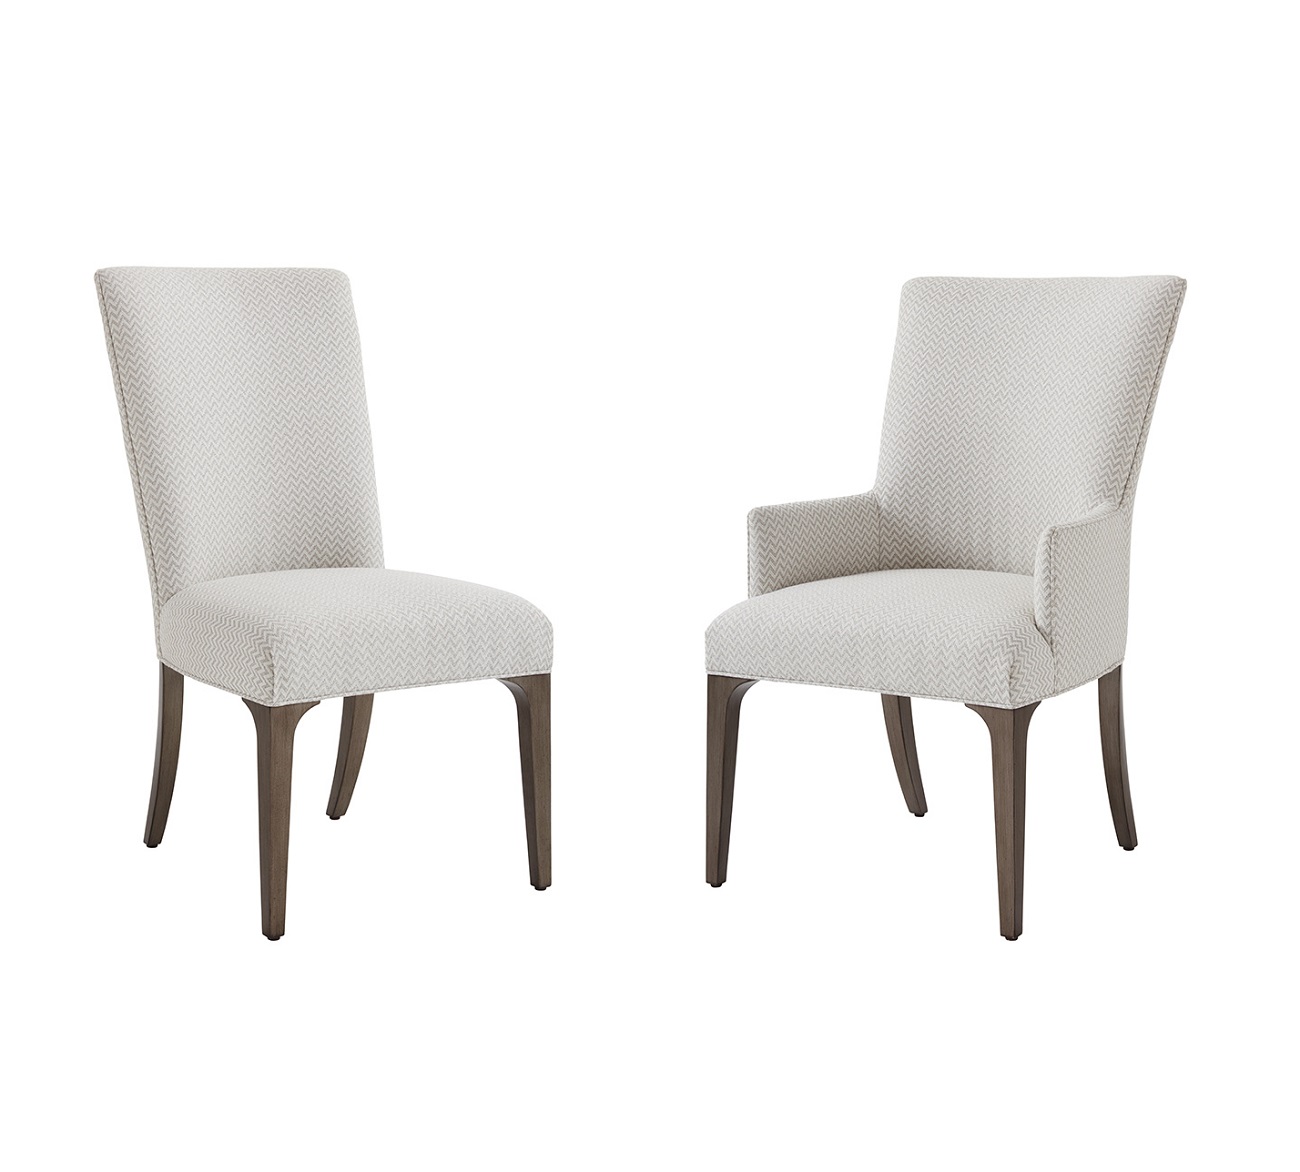 Ariana Bellamy Dining Chair, Lexington Leather Dining Chairs For Sale